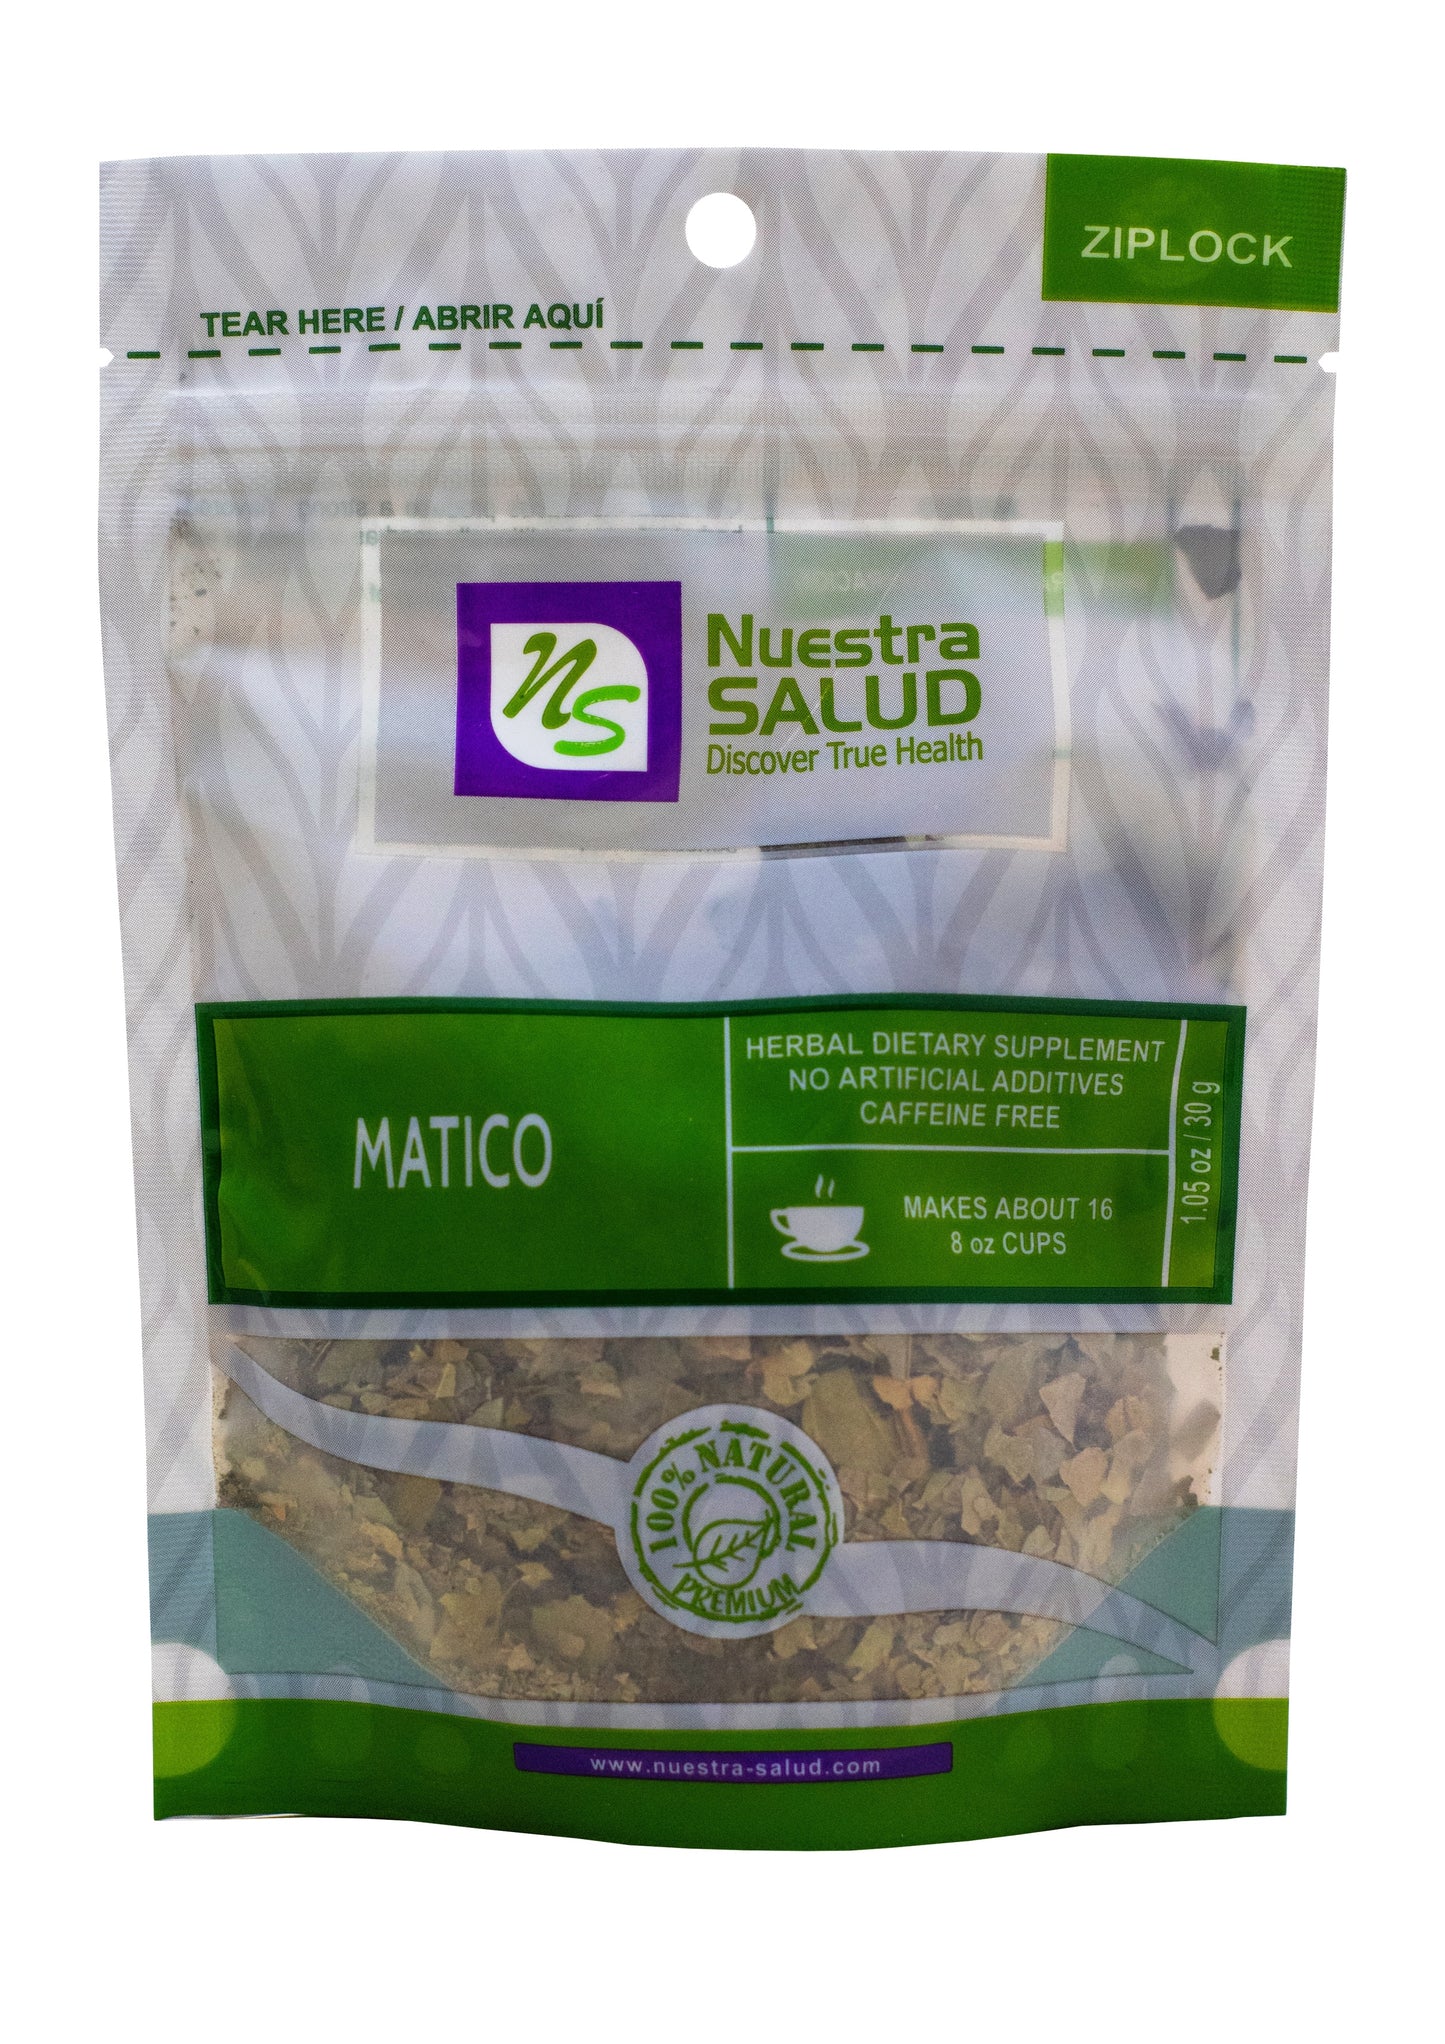  Matico Loose Herbal Infusion Tea Value Pack (90 grams) by Nuestra Salud sold by NS Herbs Co.